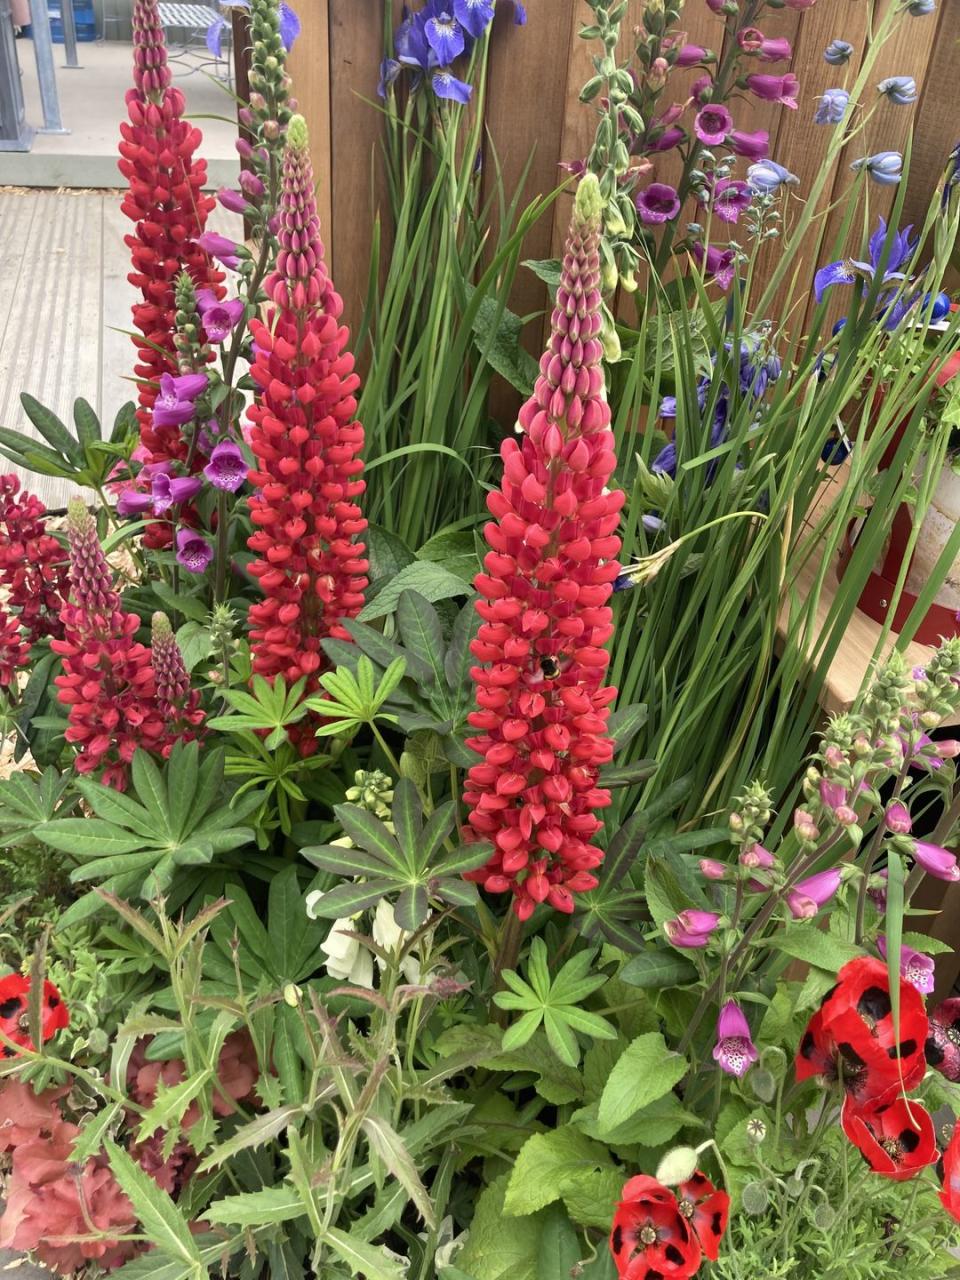 <p>A Chelsea favourite, these wonderful spires of richly coloured flowers have graced many gardens and displays this year. Once a cottage garden favourite, lupins have been tarnished with the old-fashioned brush for too long, and, being prone to aphids, they sometimes put off new growers.</p><p>Rich purple spires of Lupinus ‘Masterpiece’ graced the Perennial Garden, With Love by Richard Miers and similar shades pop up in Grow2Know’s Hands Off Mangrove garden, and in the containers on the small balcony space of the Cirrus Garden by Jason Williams, it's hard to miss ‘Towering Inferno’. </p><p>To be on trend with your lupins, don’t plant them en masse, but mix them up with similar height irises and foxgloves and a froth of softer grasses and smaller, lower growing flowers such as geums and California poppies. If they’re hot at Chelsea, it must be time for a revival of these wonderful plants.</p>